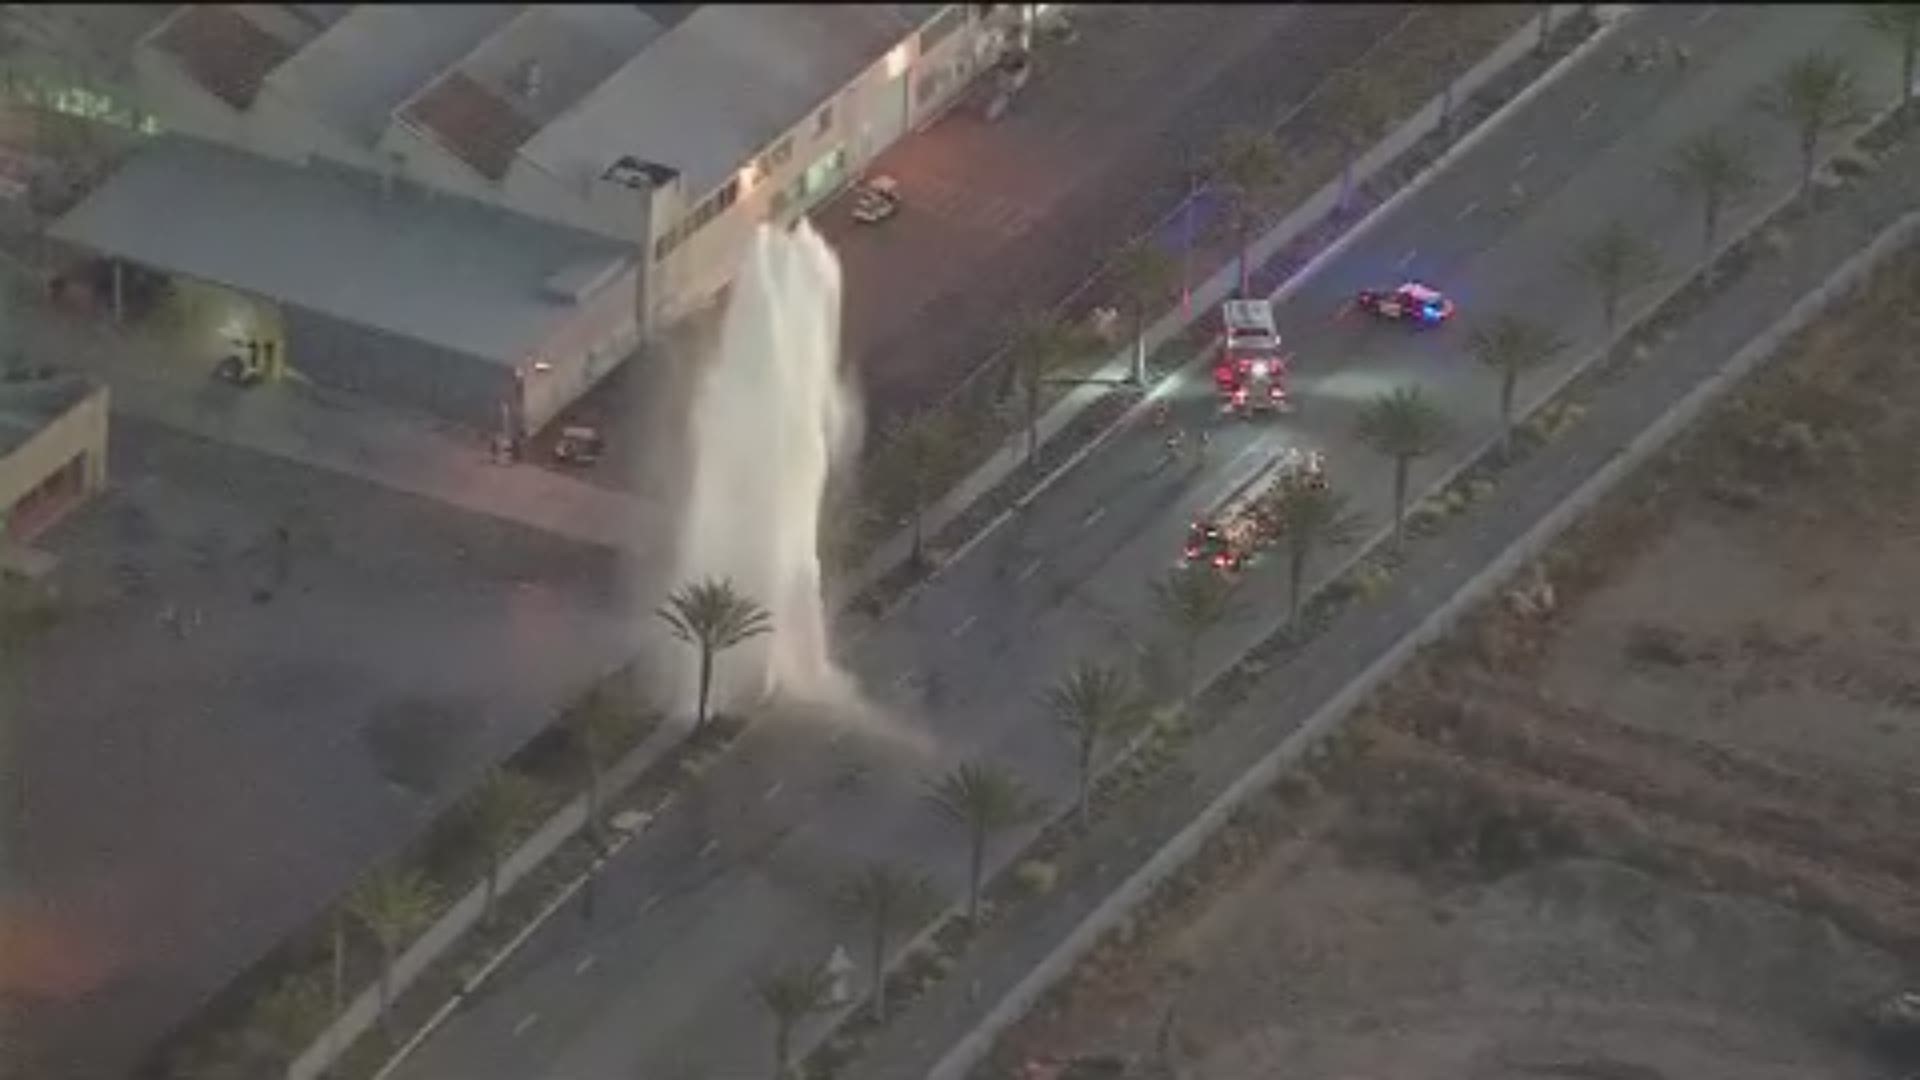 A geyser erupted in Chula Vista early Tuesday morning after a fire hydrant was hit, according to authorities.